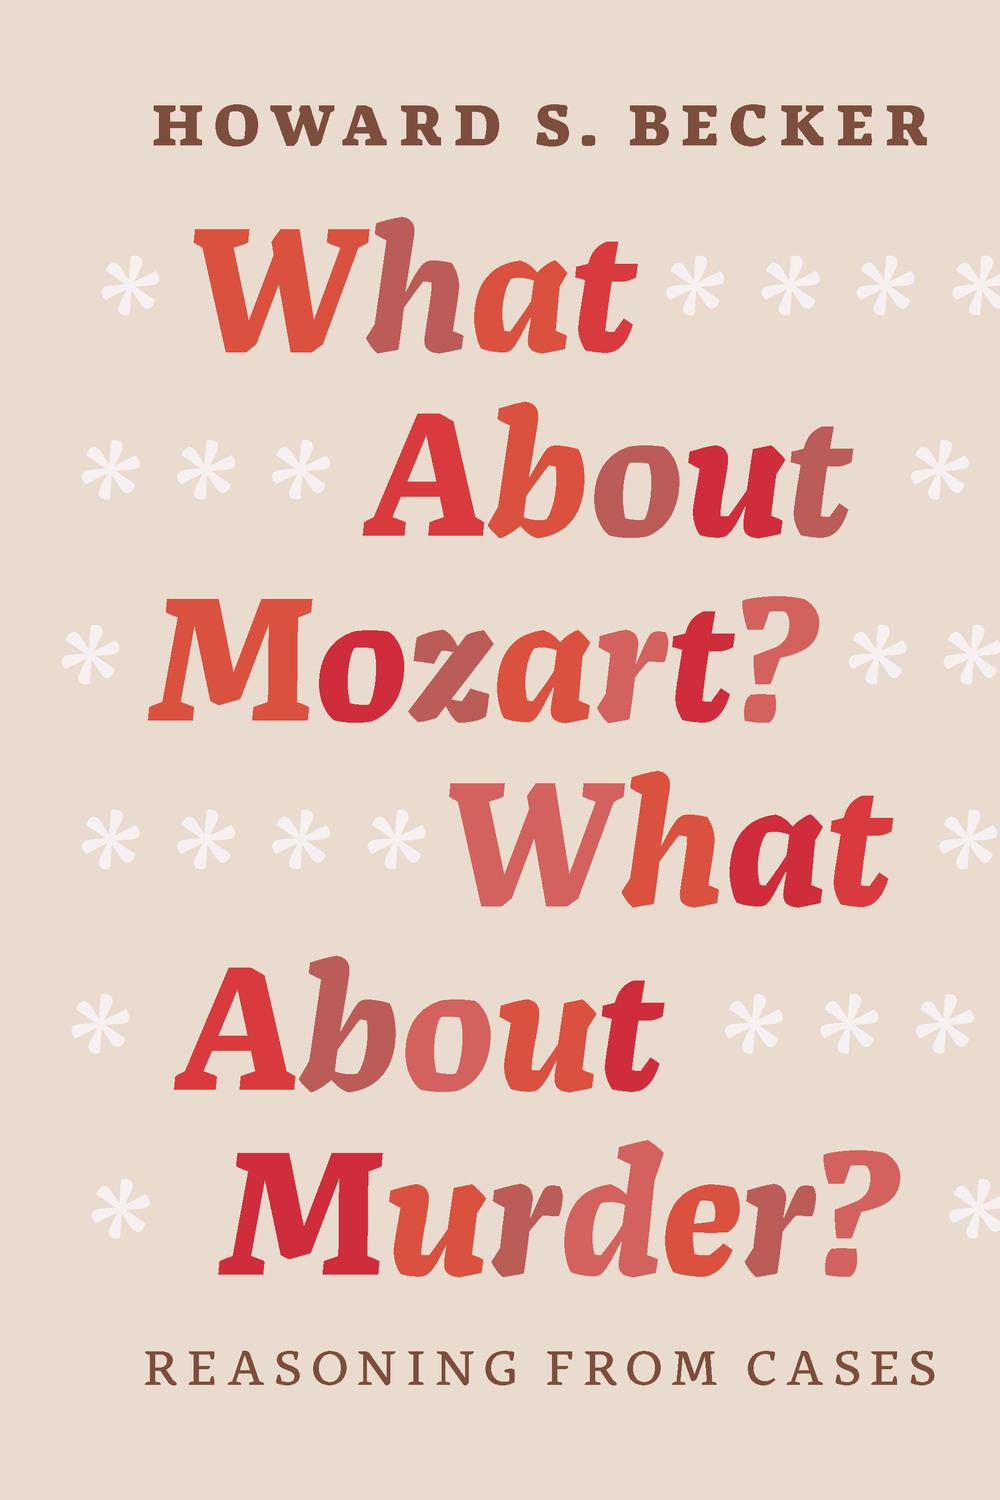 What About Mozart? What About Murder? - Howard S. Becker